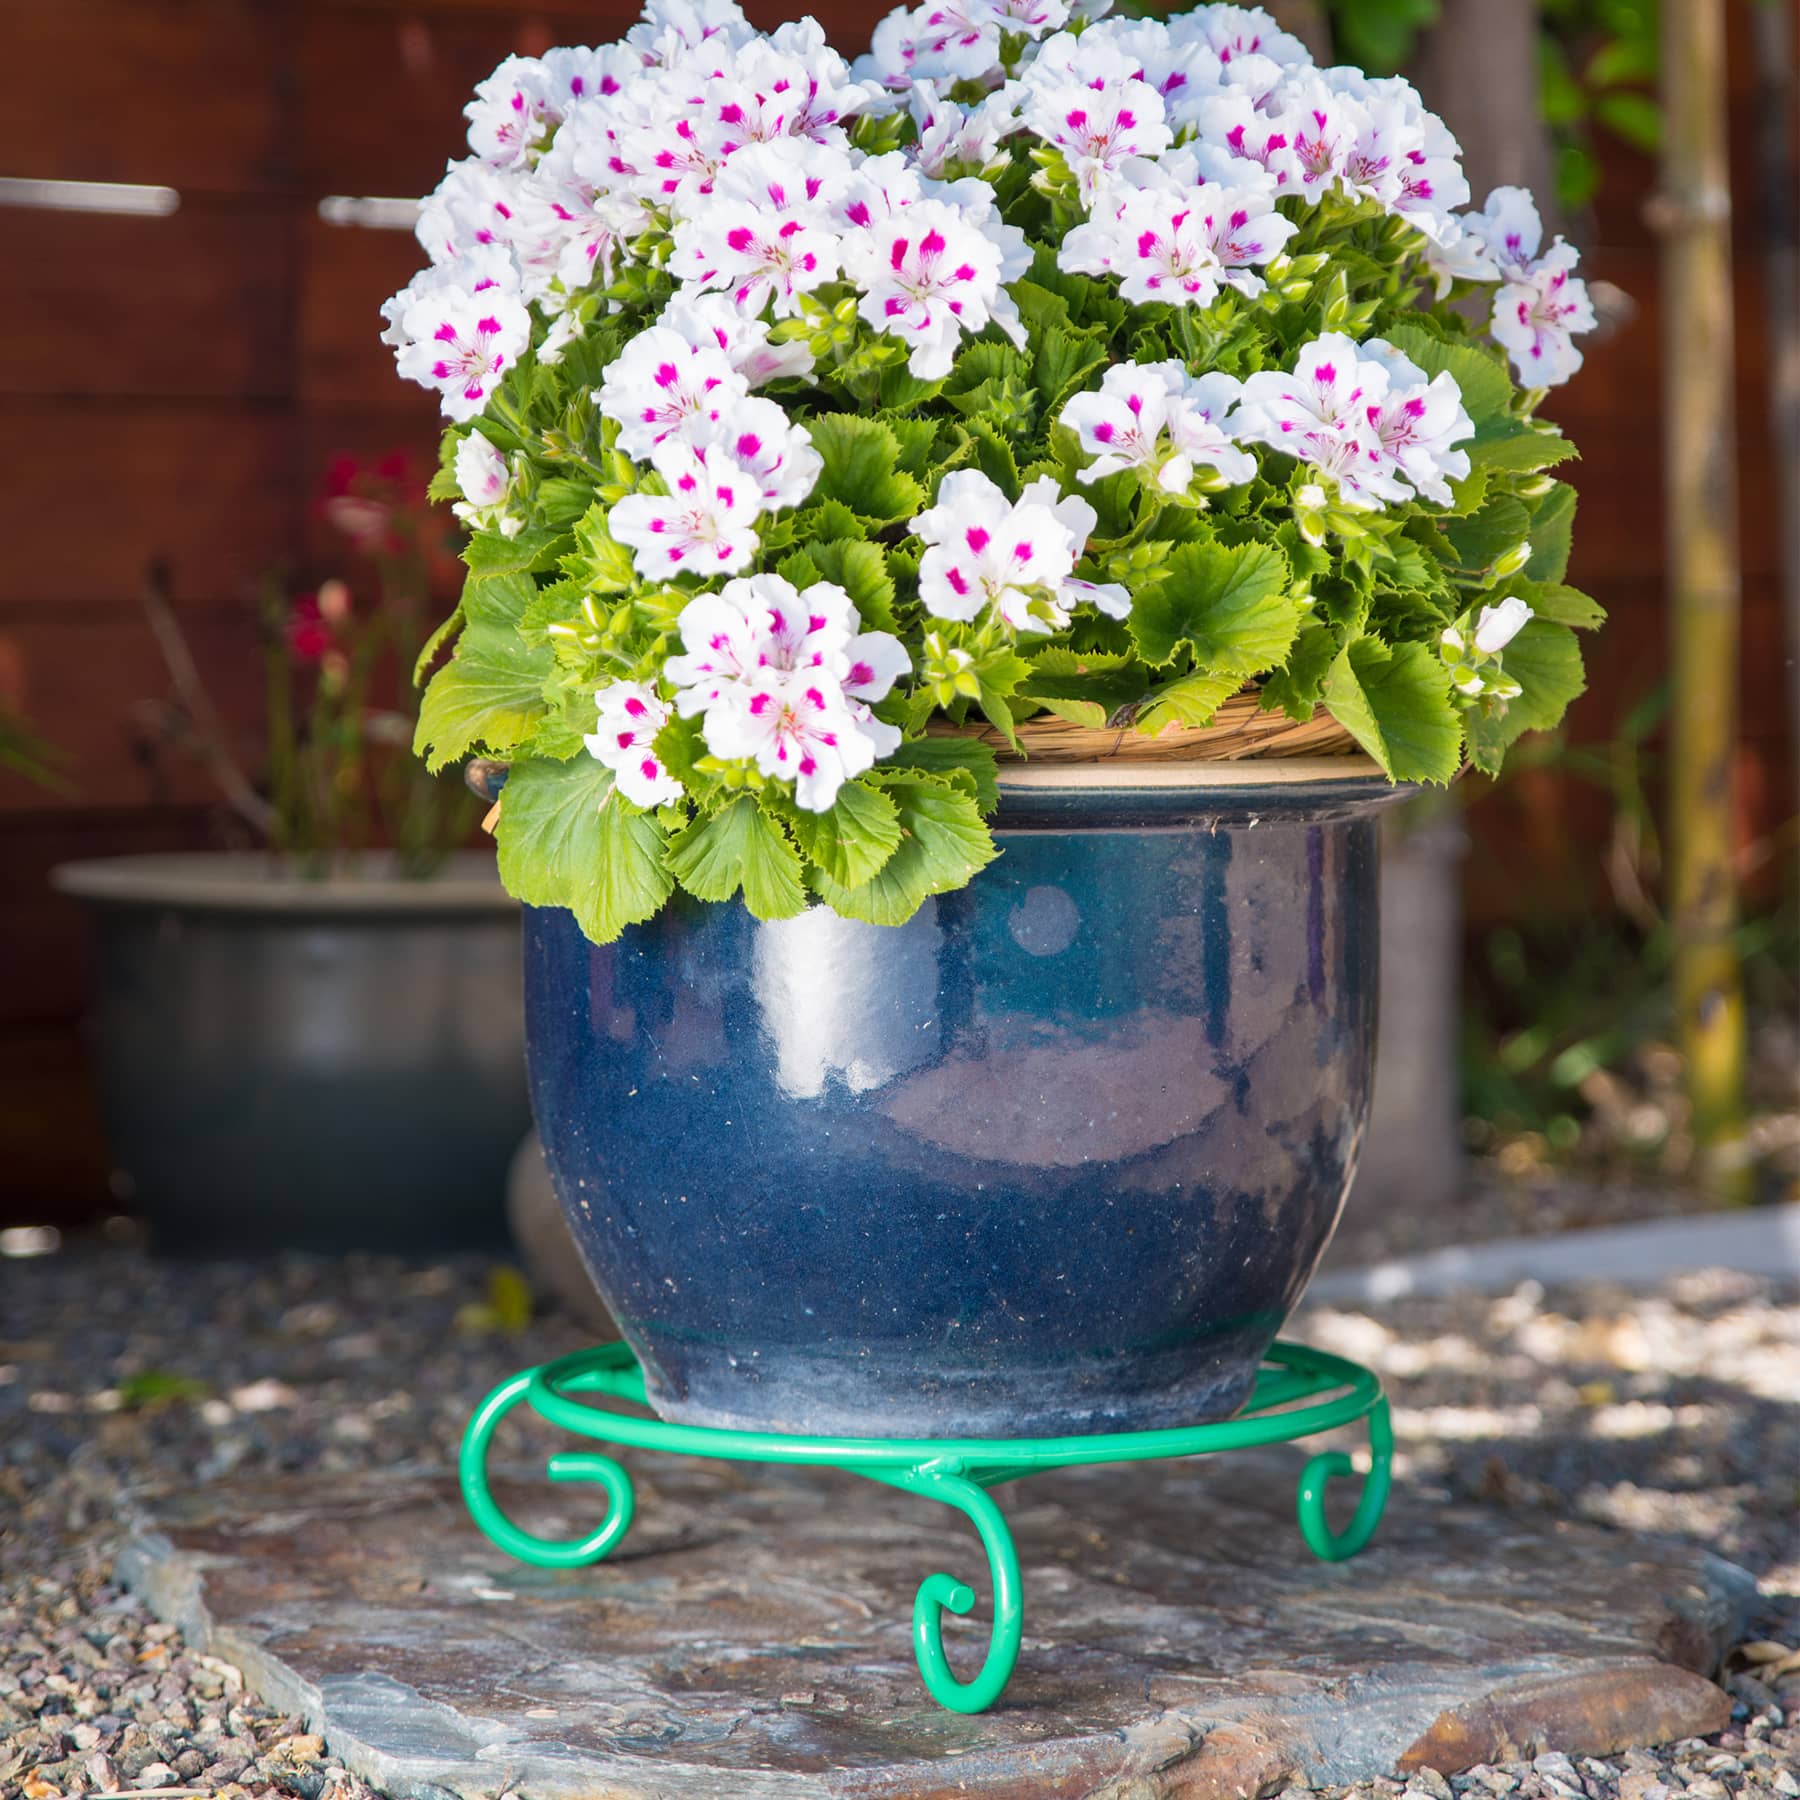 Metal Plant Stands; Heavy Duty Flower Pot Stands for Multiple